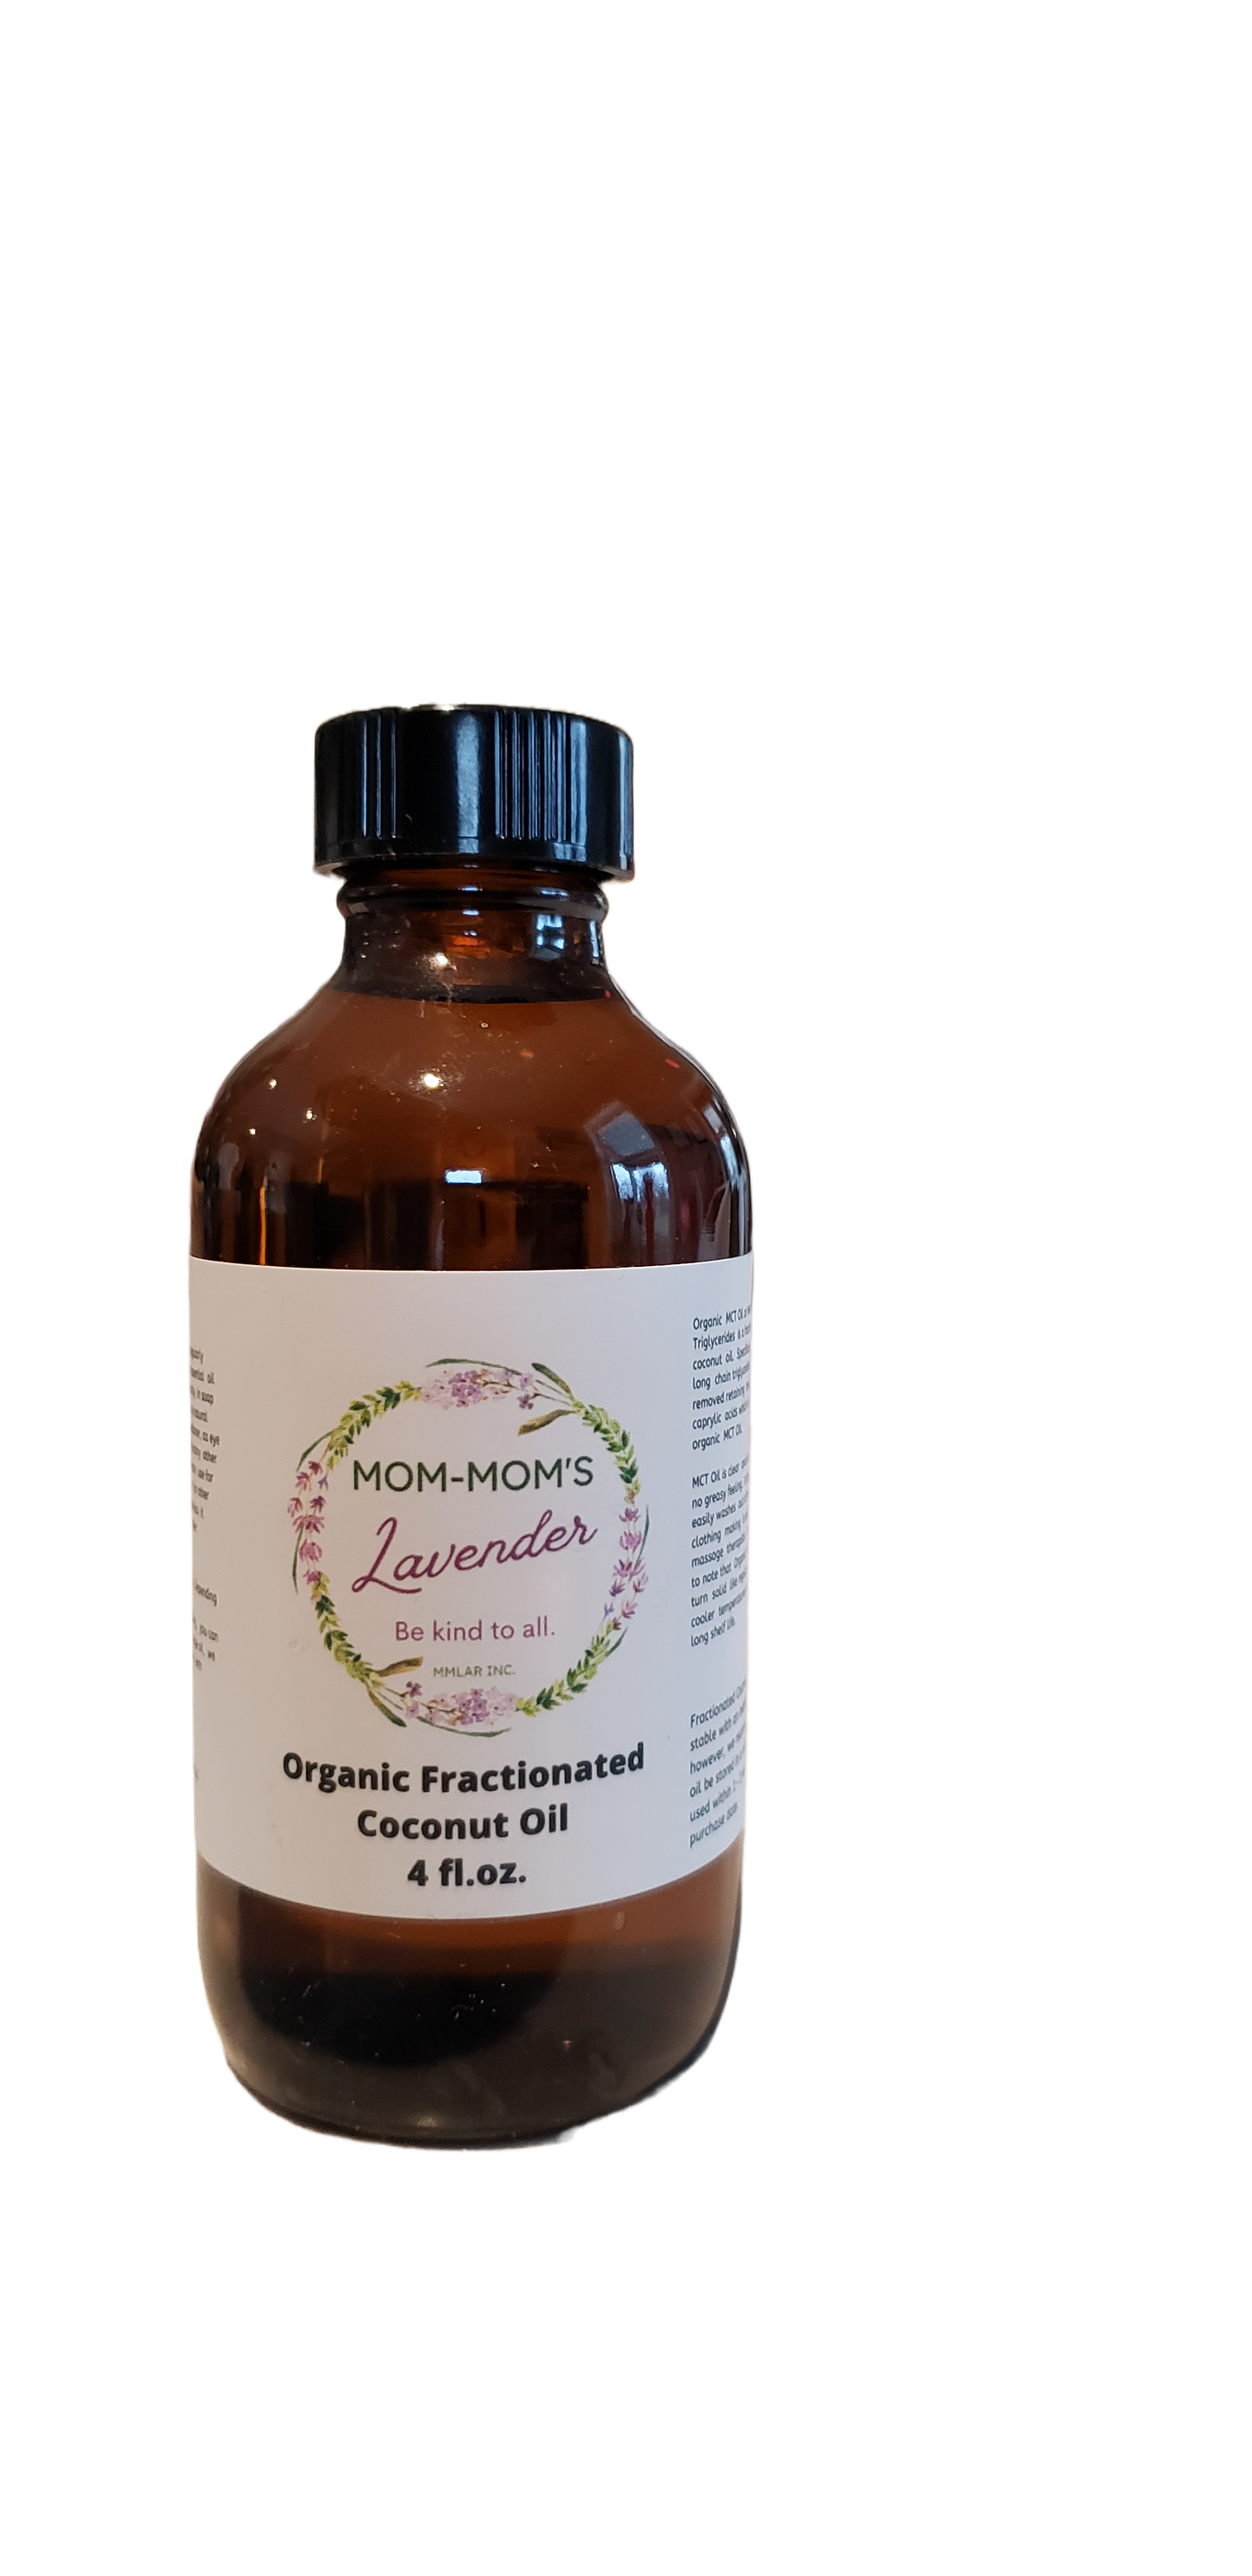 Certified Organic Fractionated Coconut Oil (MCT - Medium Chain Triglycerides)